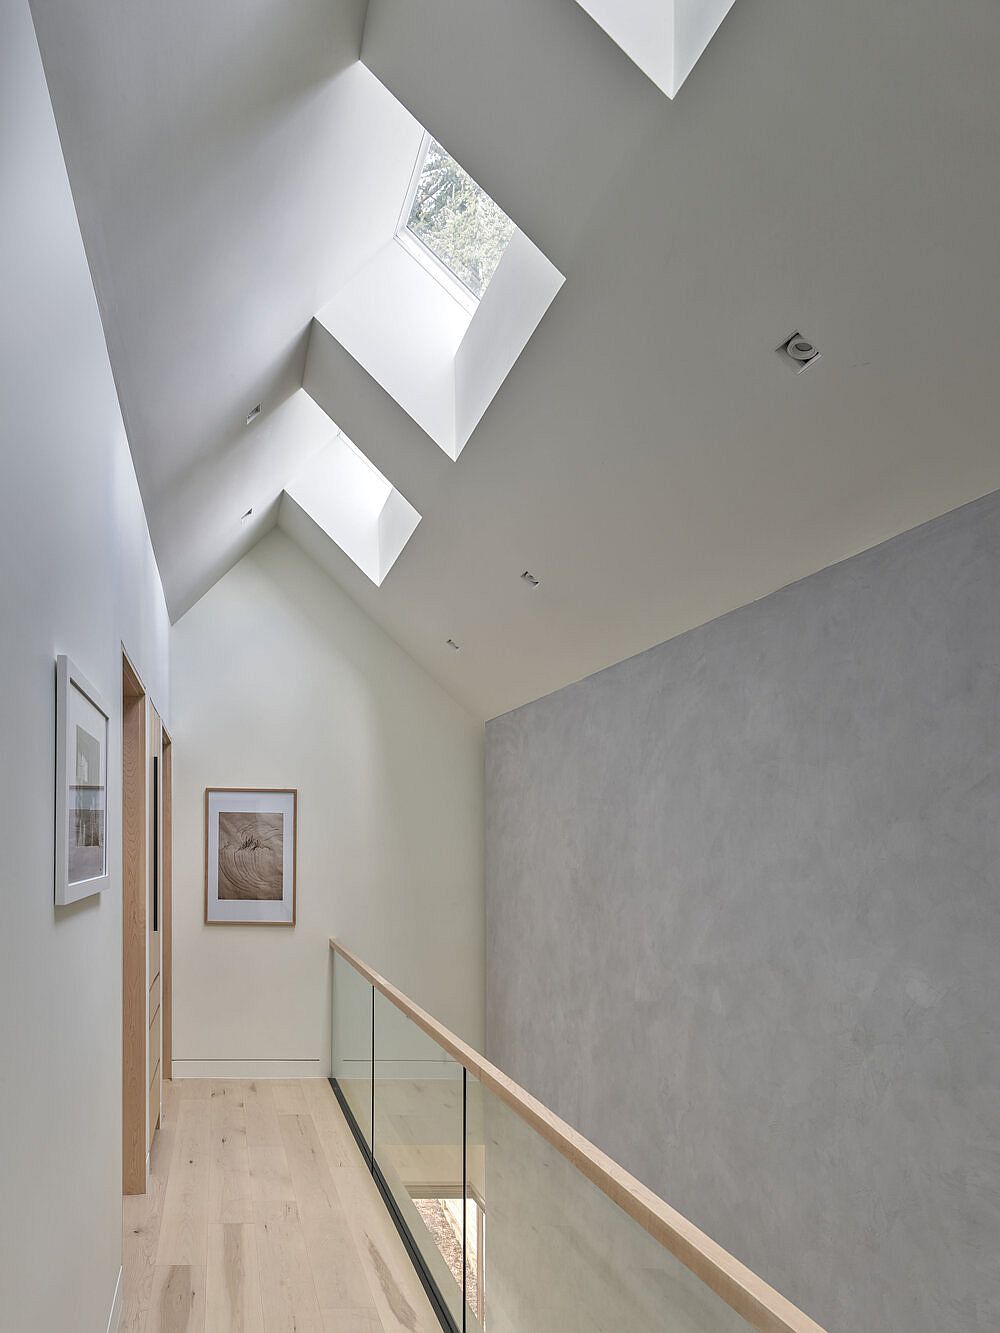 Series-of-skylights-on-the-upper-level-bring-ample-natural-light-into-the-minimal-multi-level-interior-96703